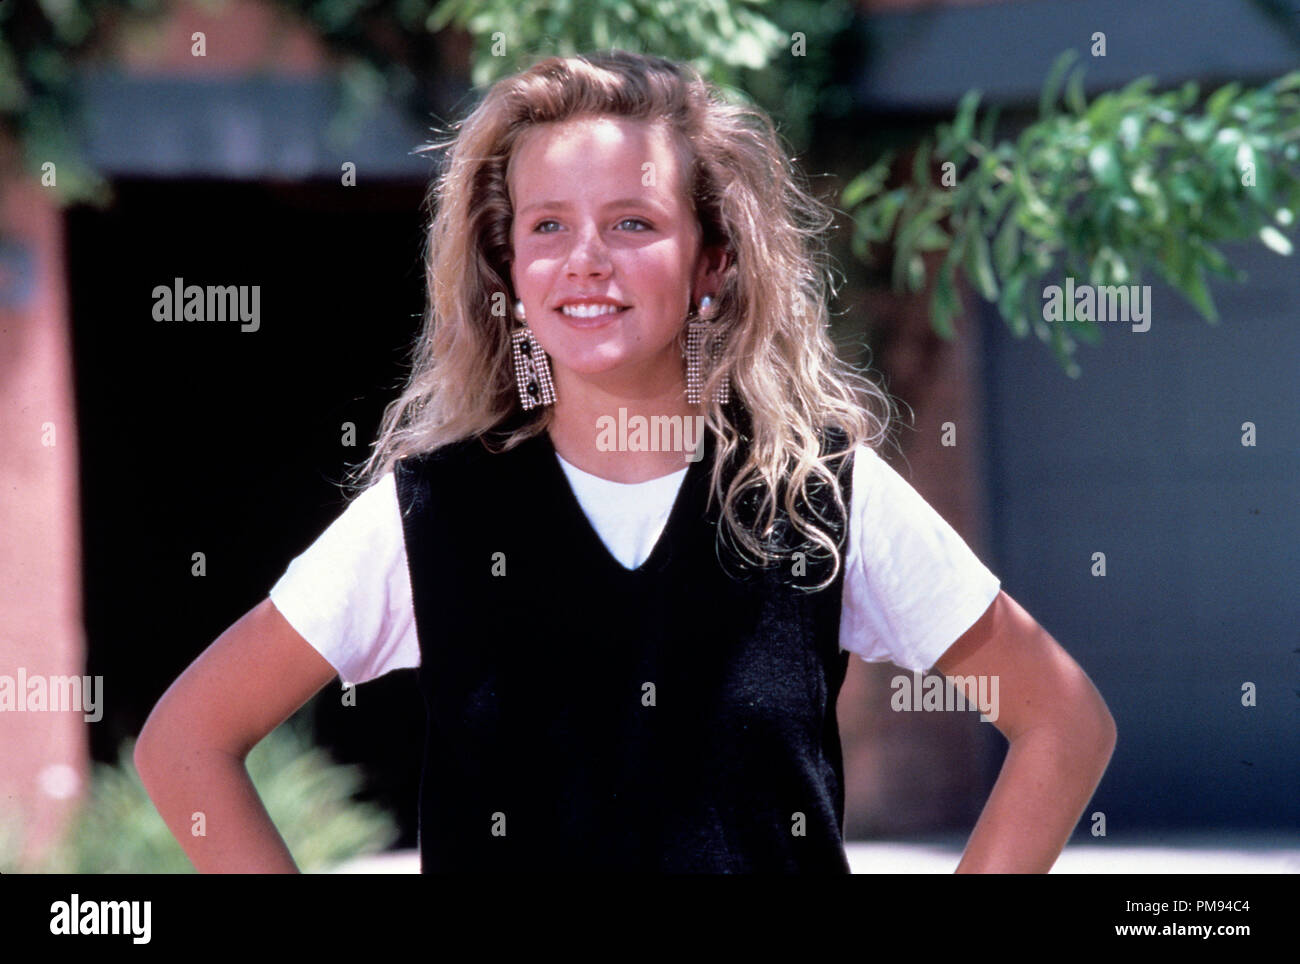 Studio Publicity Still from 'Can't Buy Me Love' Amanda Peterson © 1987 Buena Vista Pictures   All Rights Reserved   File Reference # 31697314THA  For Editorial Use Only Stock Photo